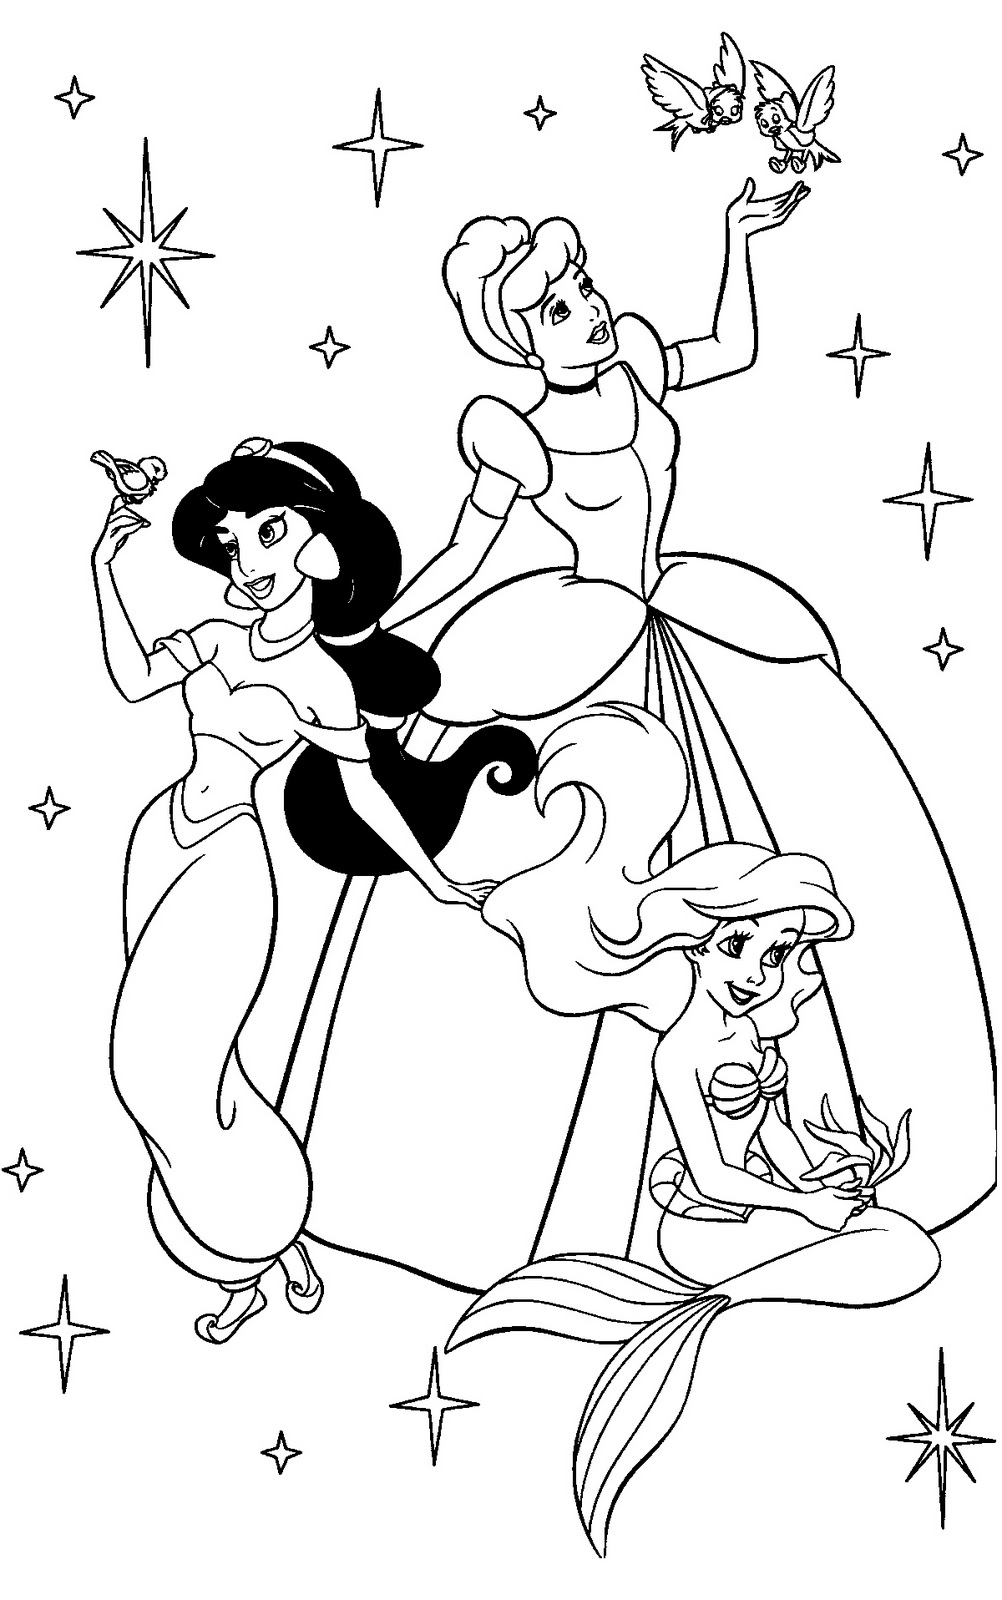 Rapunzel and Flynn coloring page